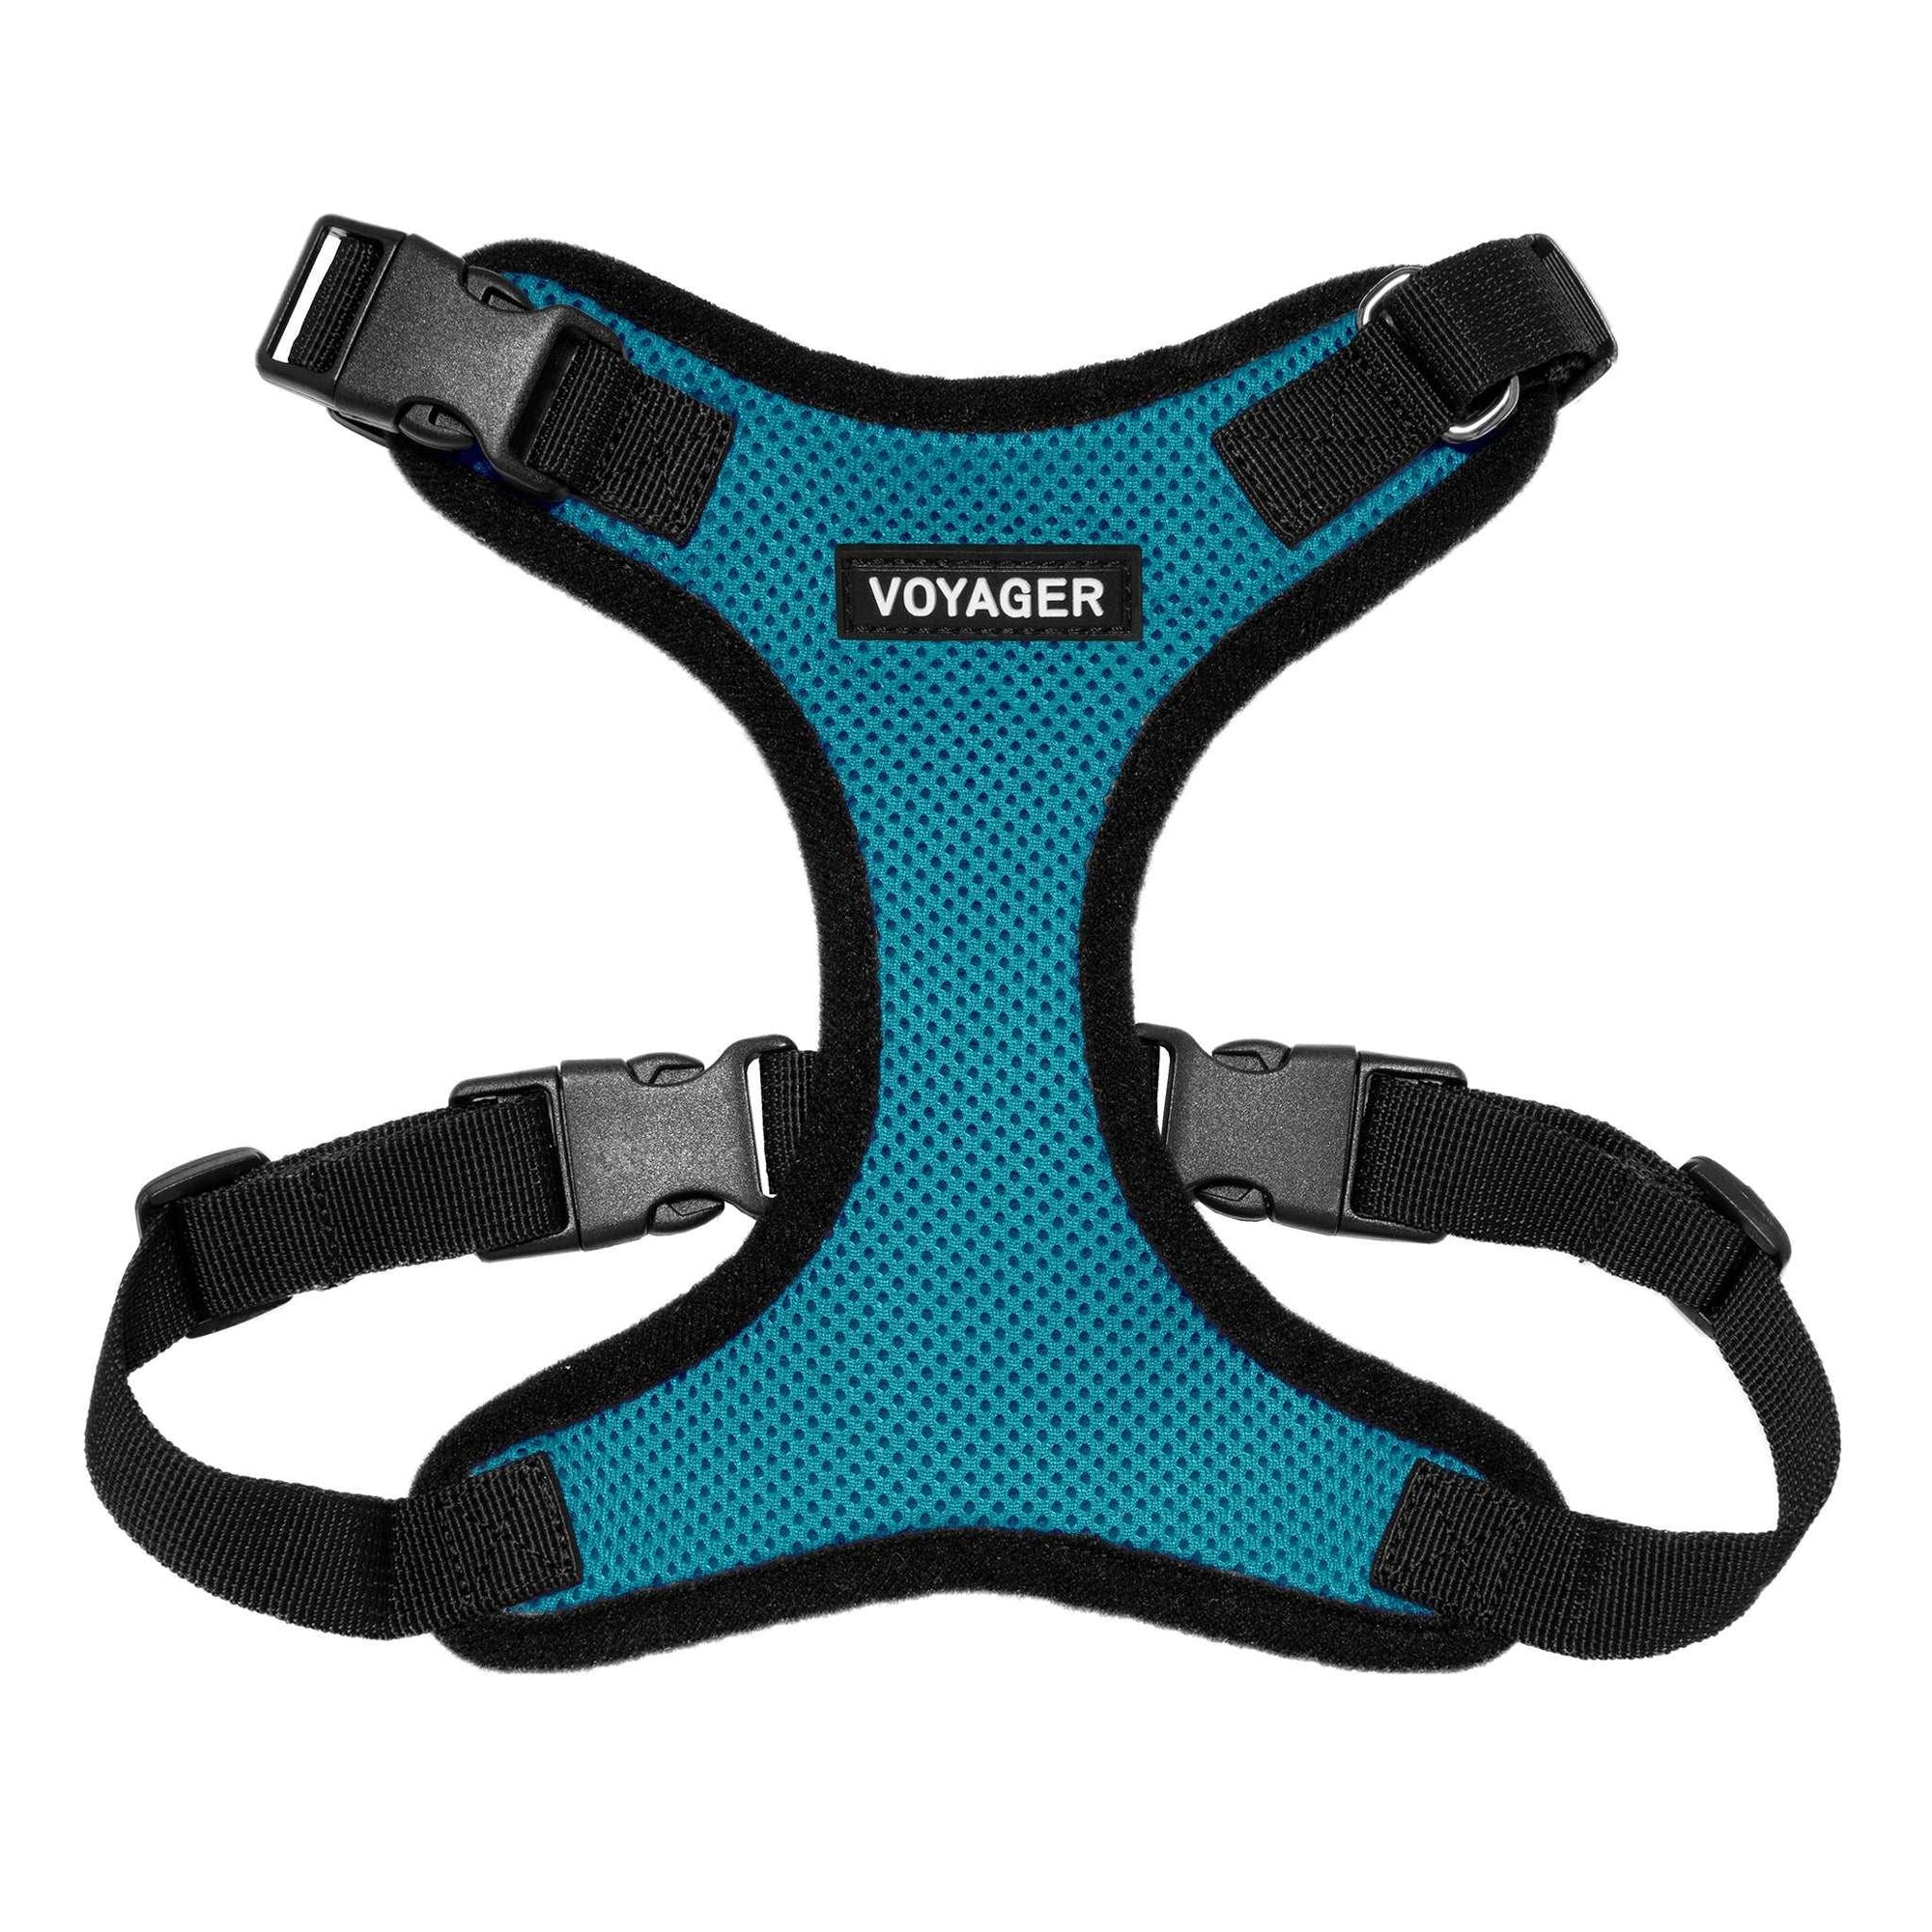 VOYAGER Step-In Lock Dog Harness in Turquoise with Black Trim and Webbing - Front